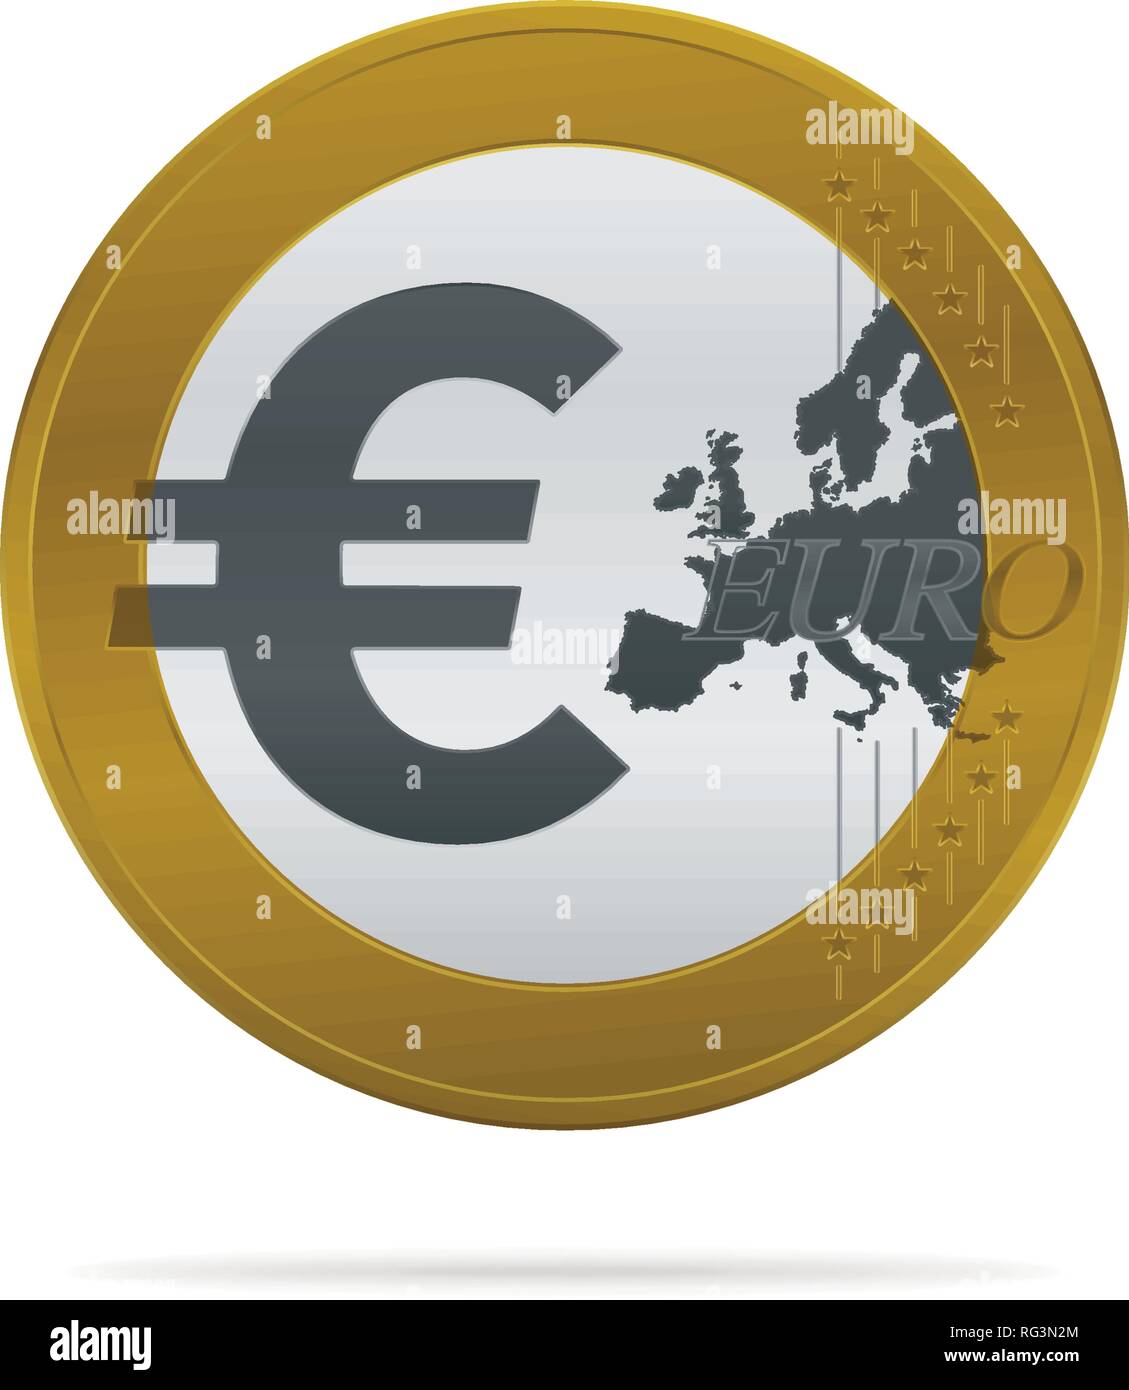 Gold colored euro coin on white background. Currency icon design. Stock Vector